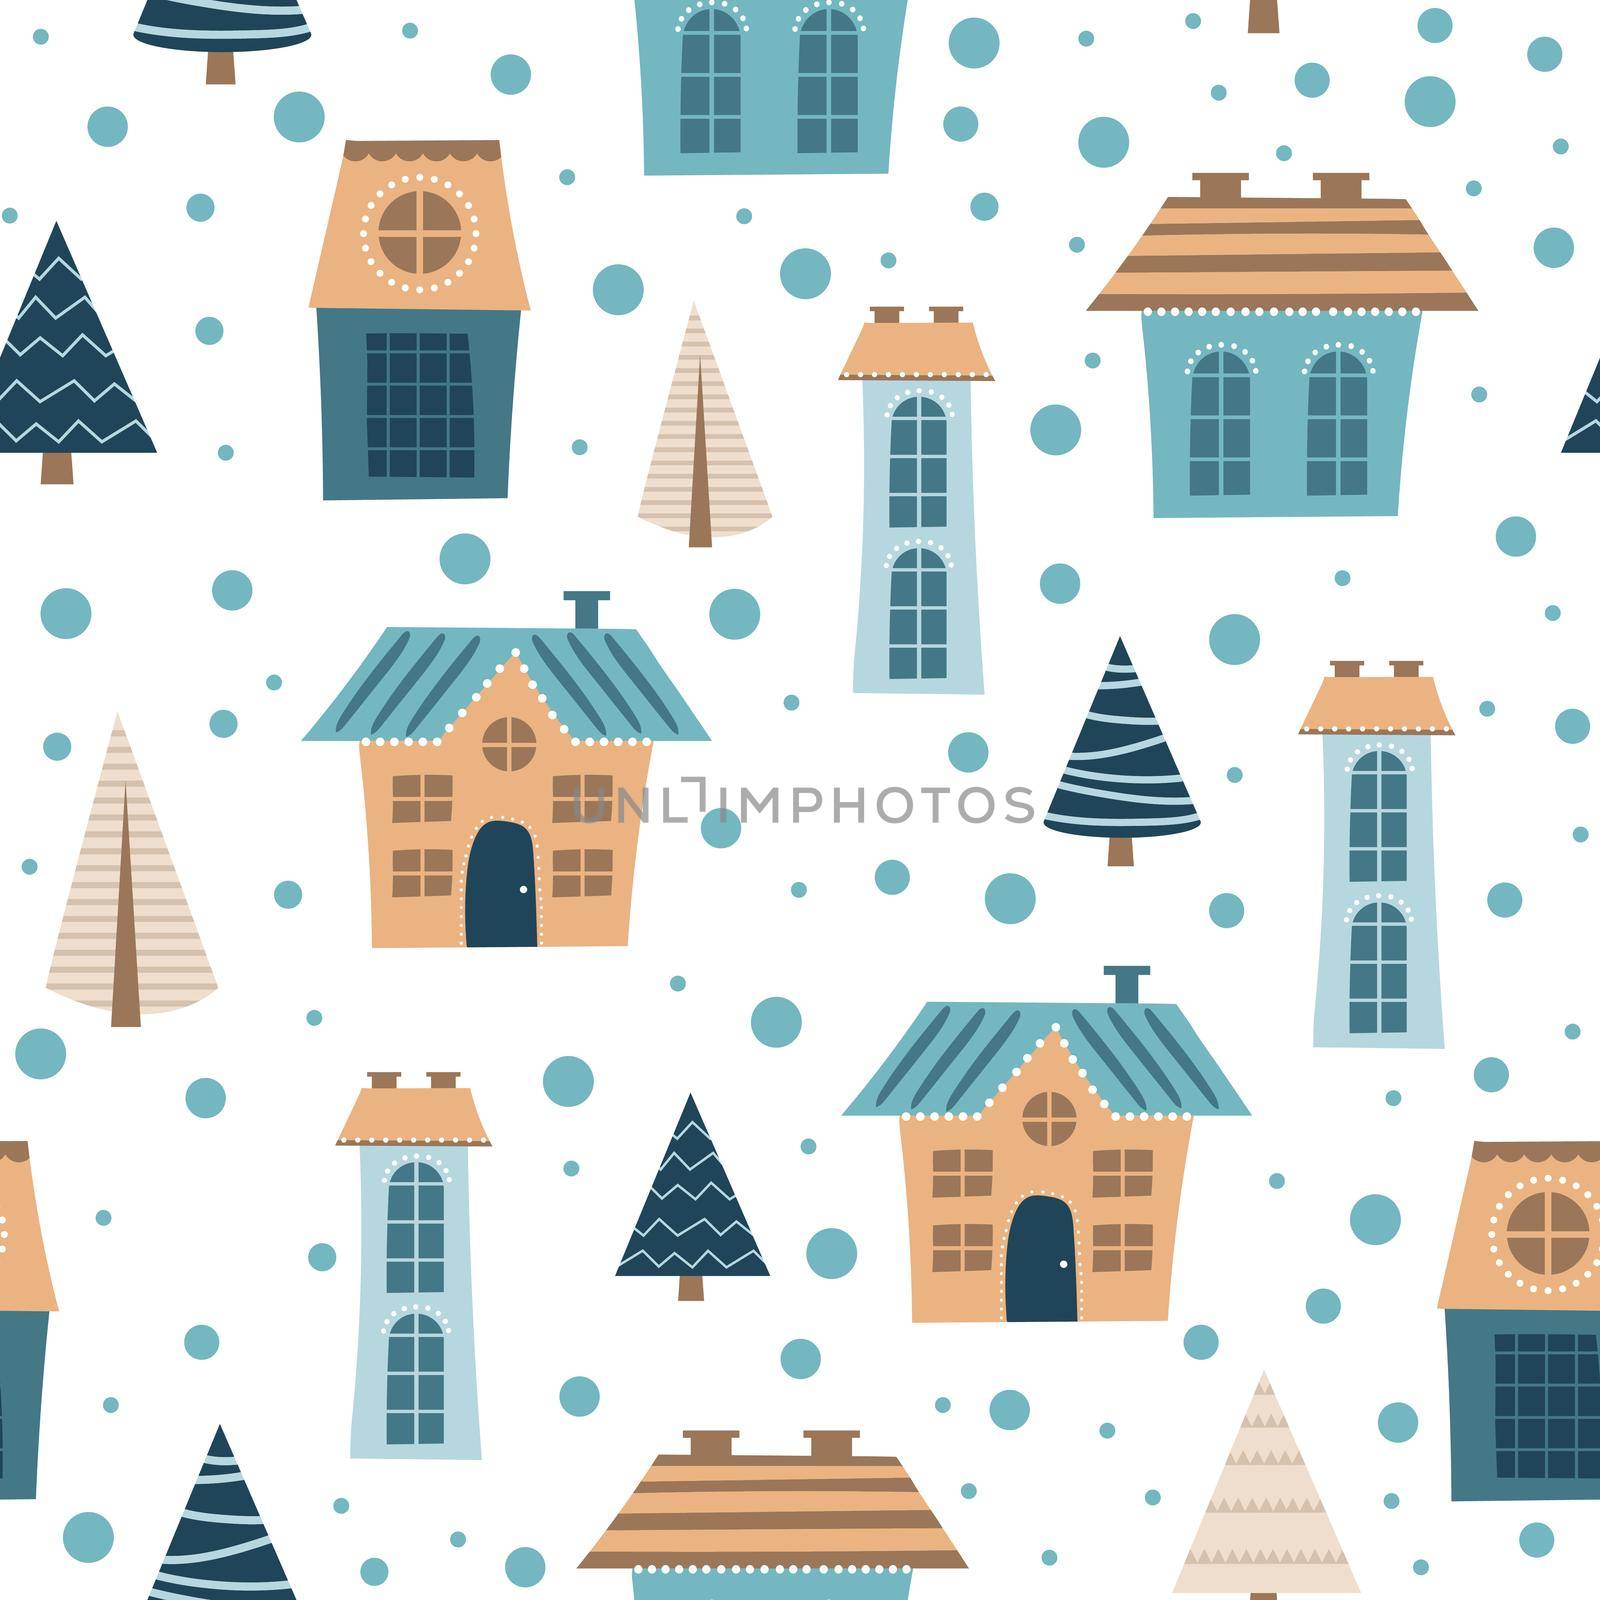 Seamless city pattern. Cartoon colored houses of different sizes endless design by natali_brill